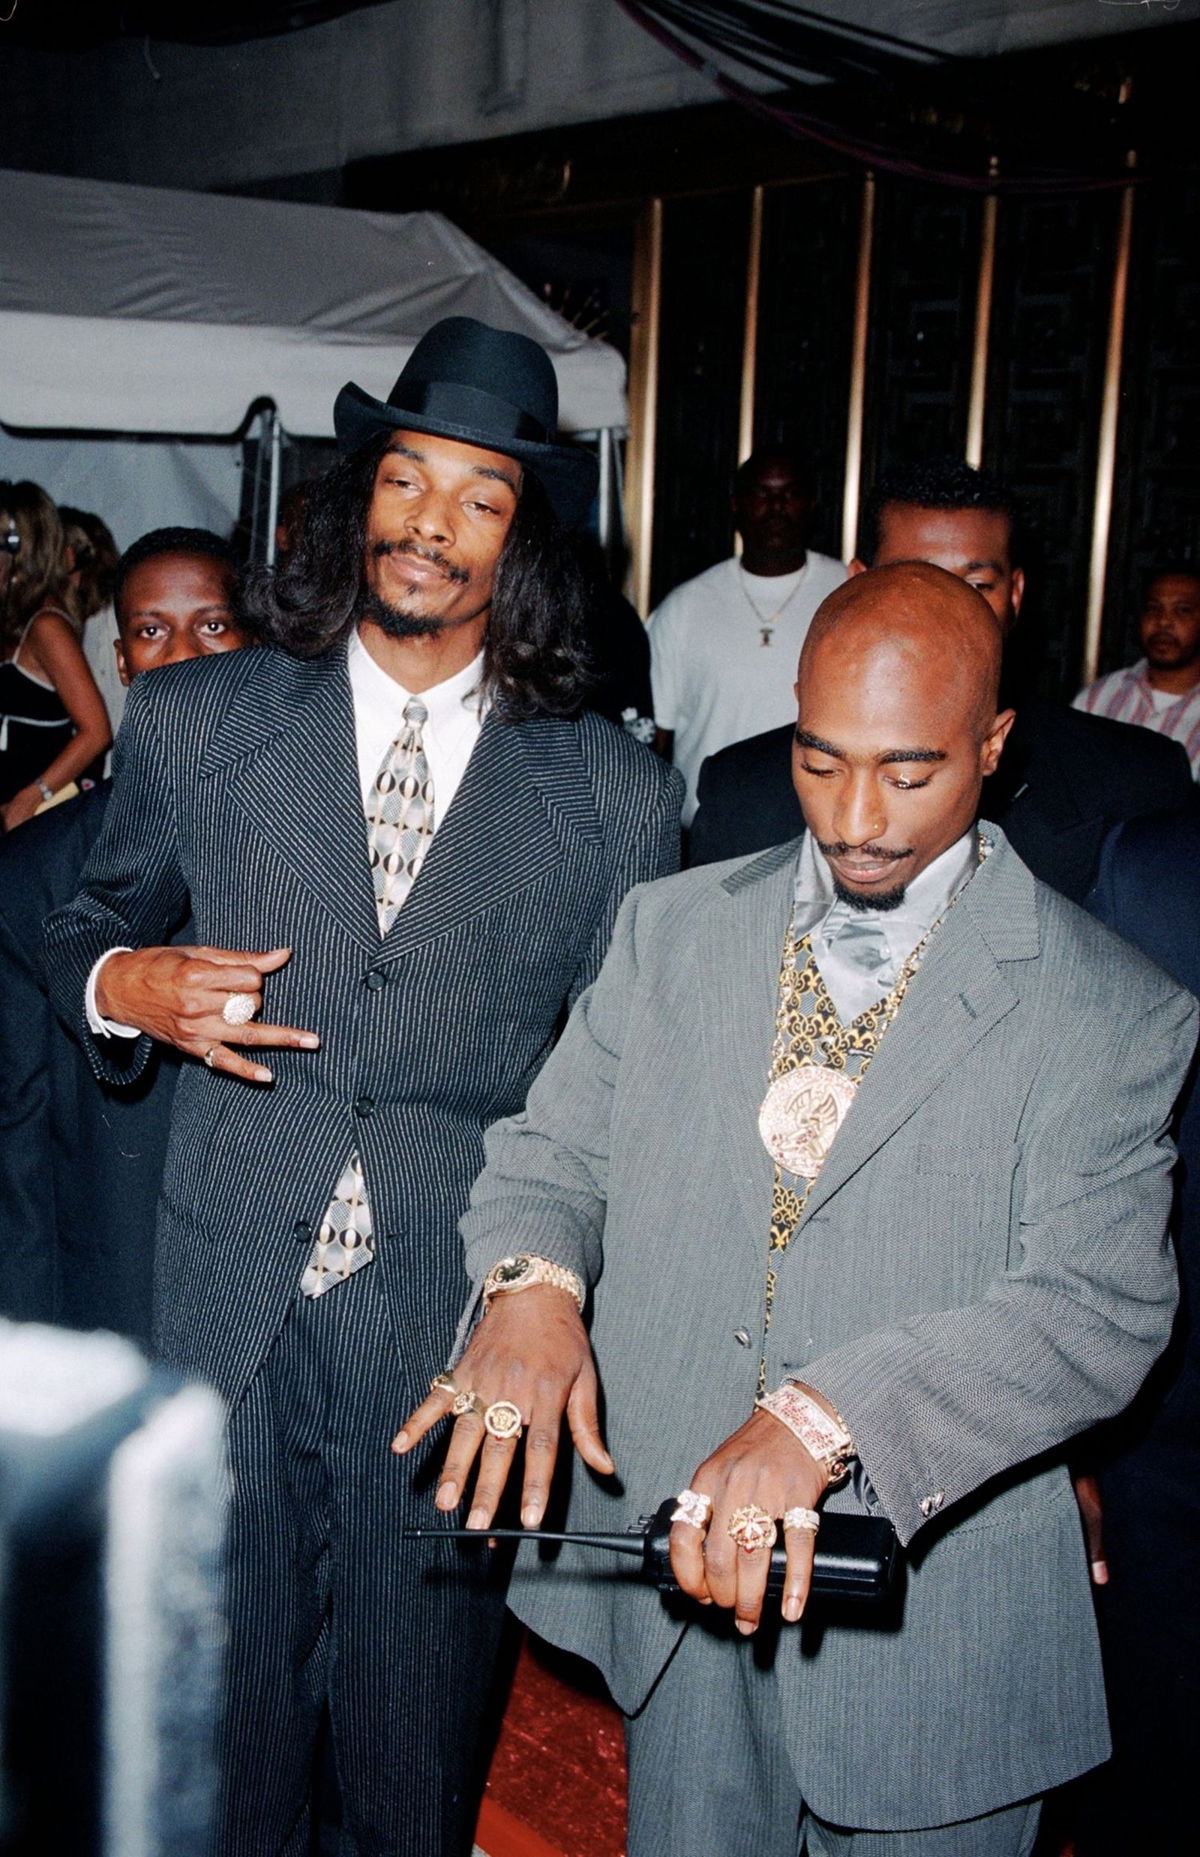 <i>DMI/The LIFE Picture Collection//Shutterstock</i><br/>From left: Snoop Doggy Dogg and Tupac Shakur show off their rings